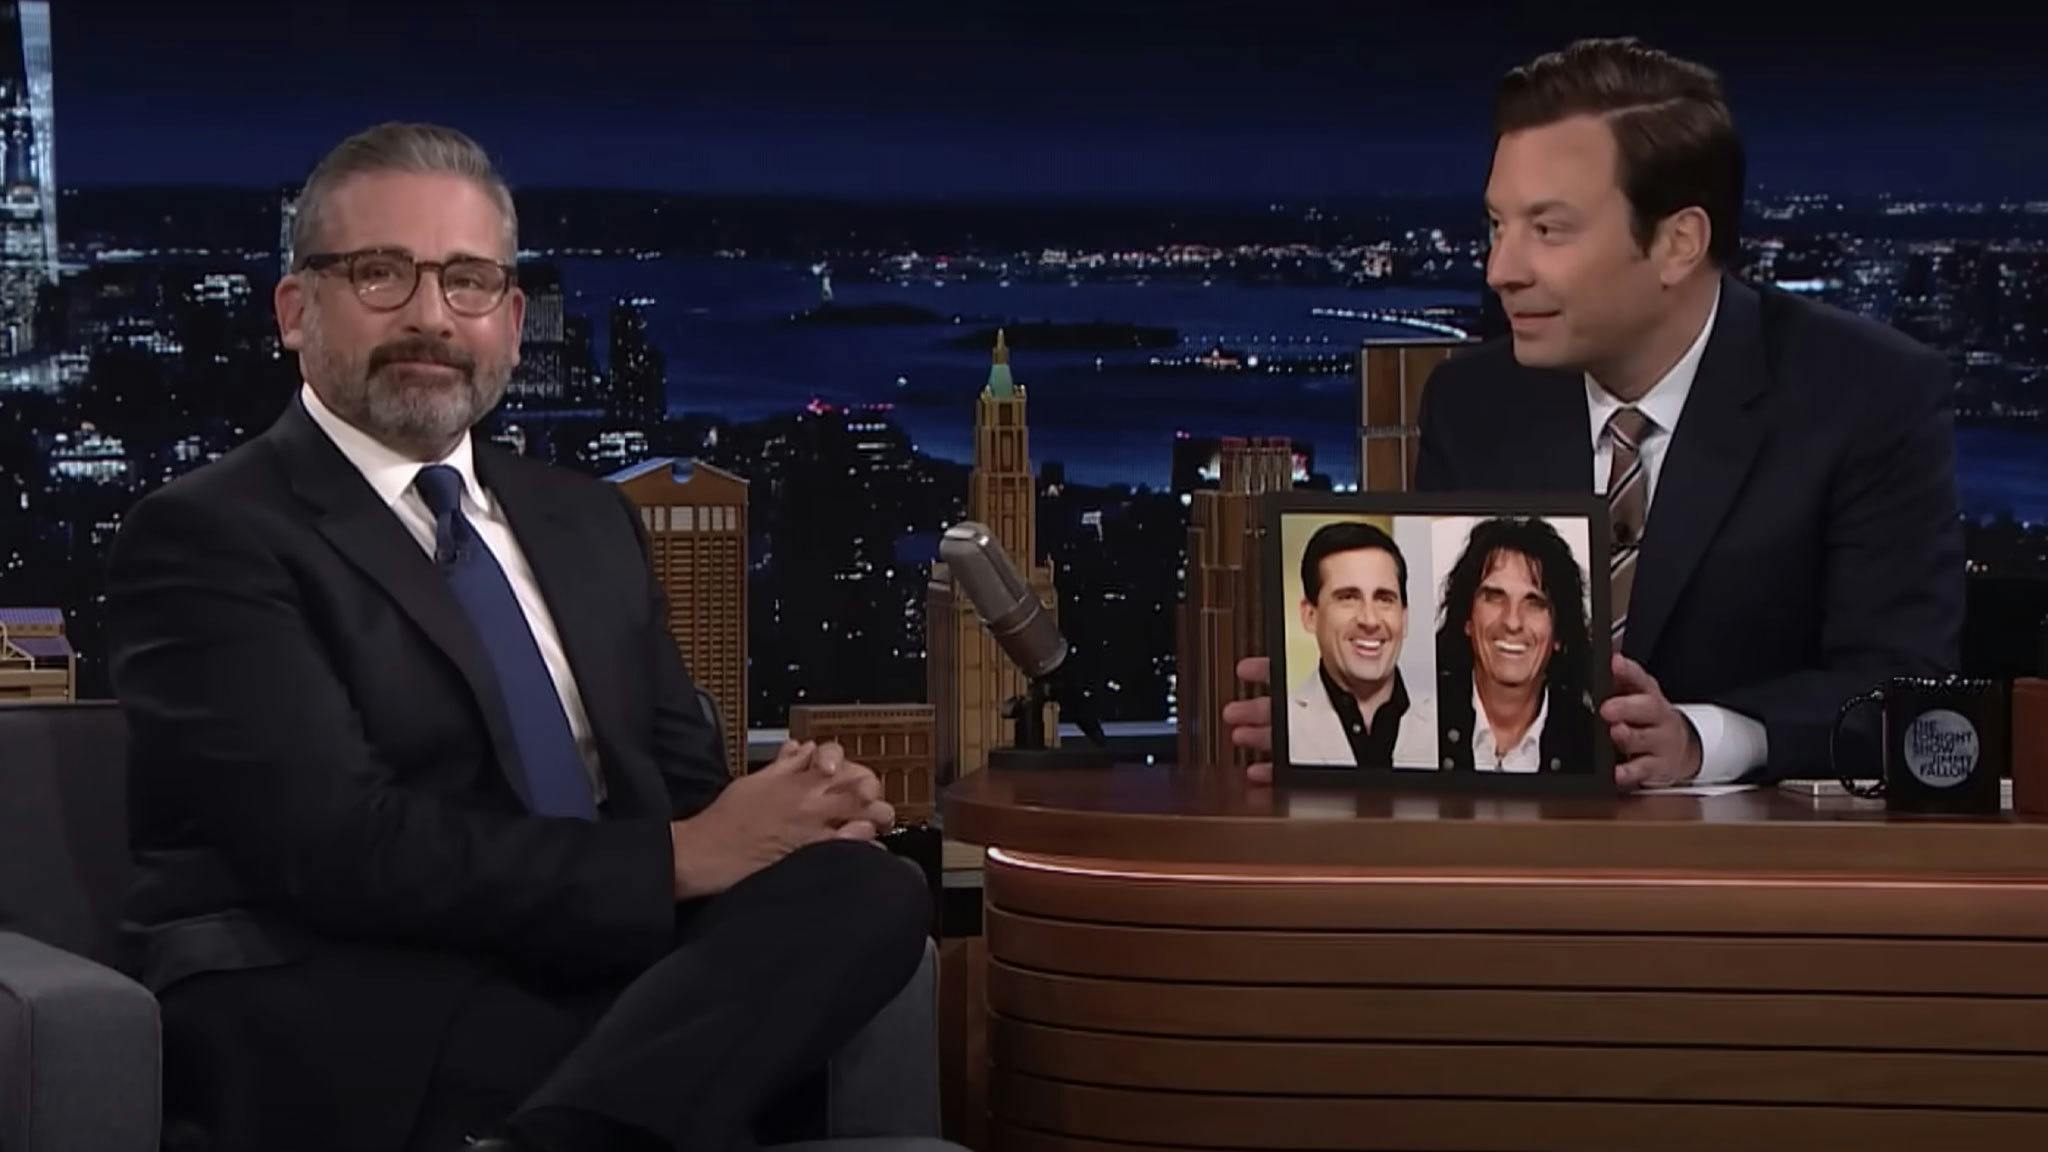 Steve Carell and Alice Cooper react to being each other’s doppelgängers